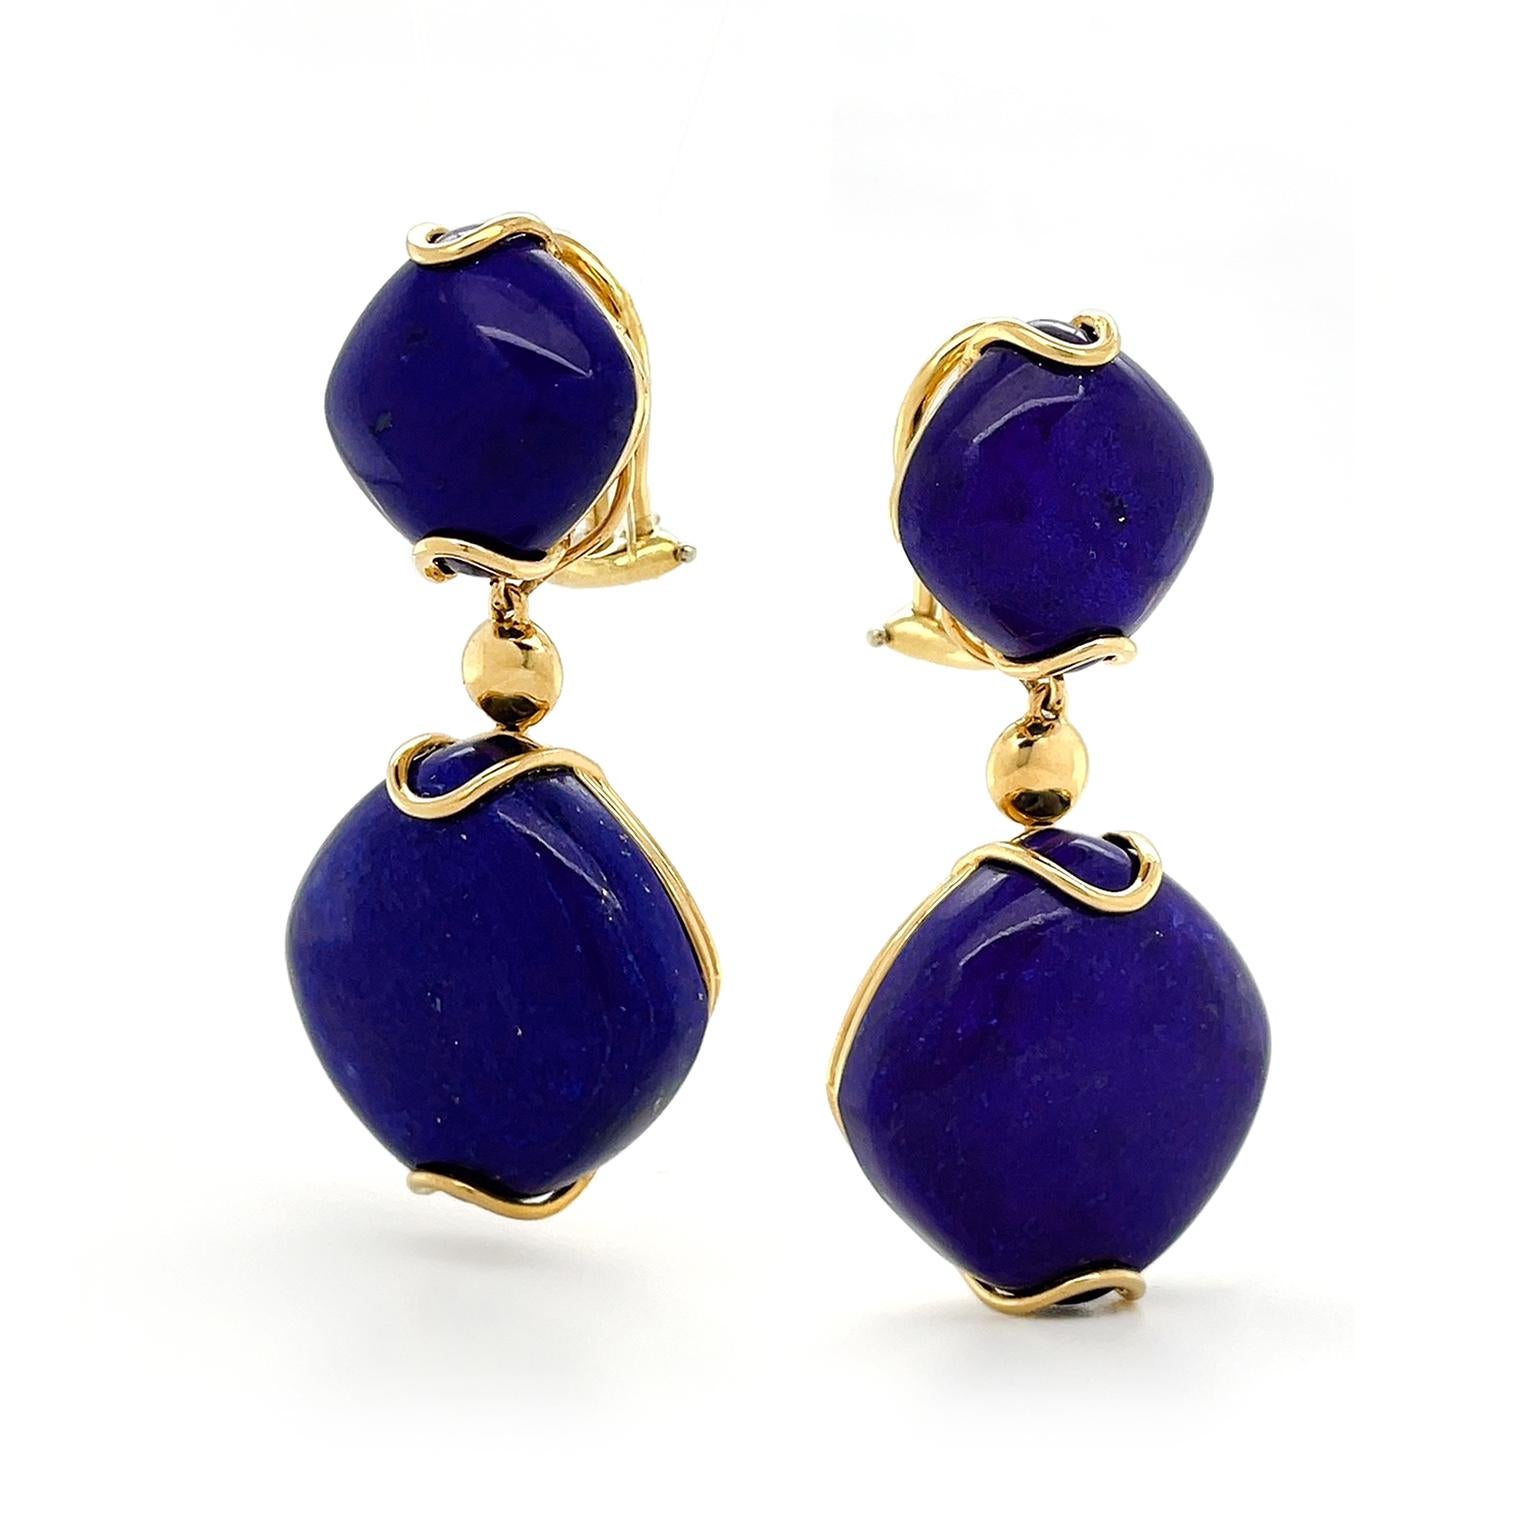 Cobalt-saturated lapis lazuli is the heart of these drop earrings accented by 18k yellow gold. A small carved cushion of the gemstone is turned on its side as a rhombus to begin the design. 18k yellow gold wire loops secure the top and bottom